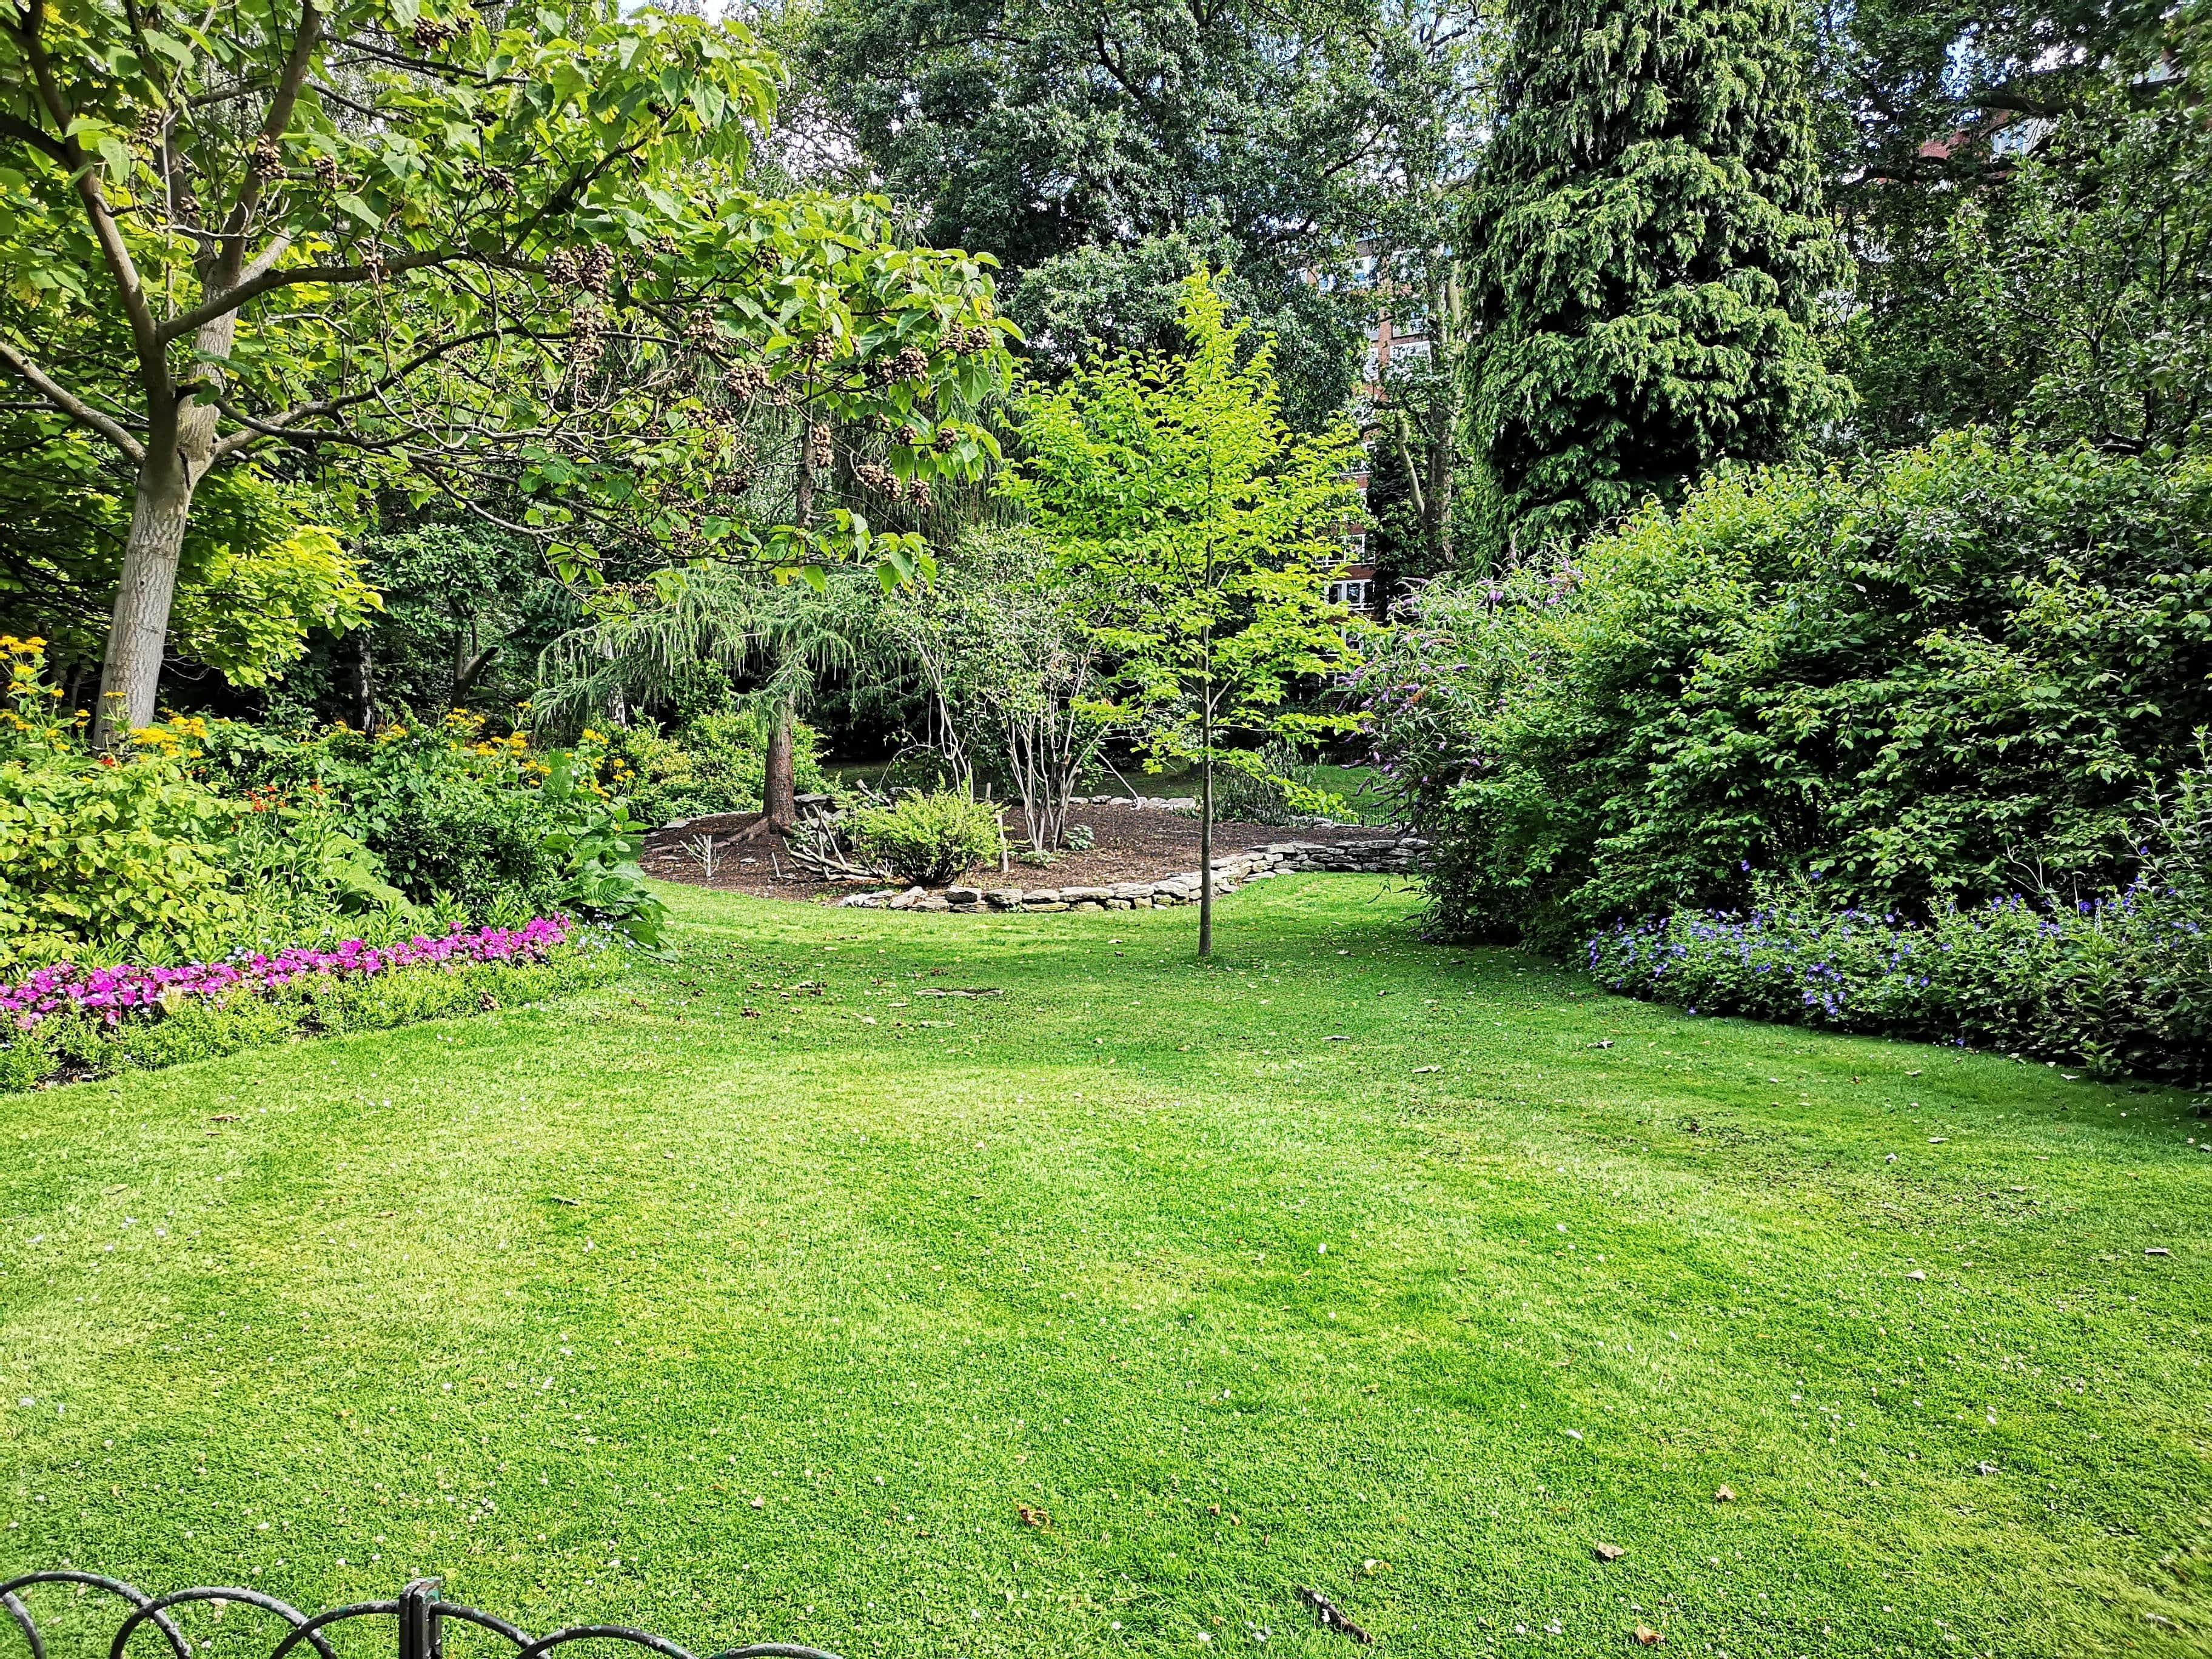 A green garden space with a lawn and large trees